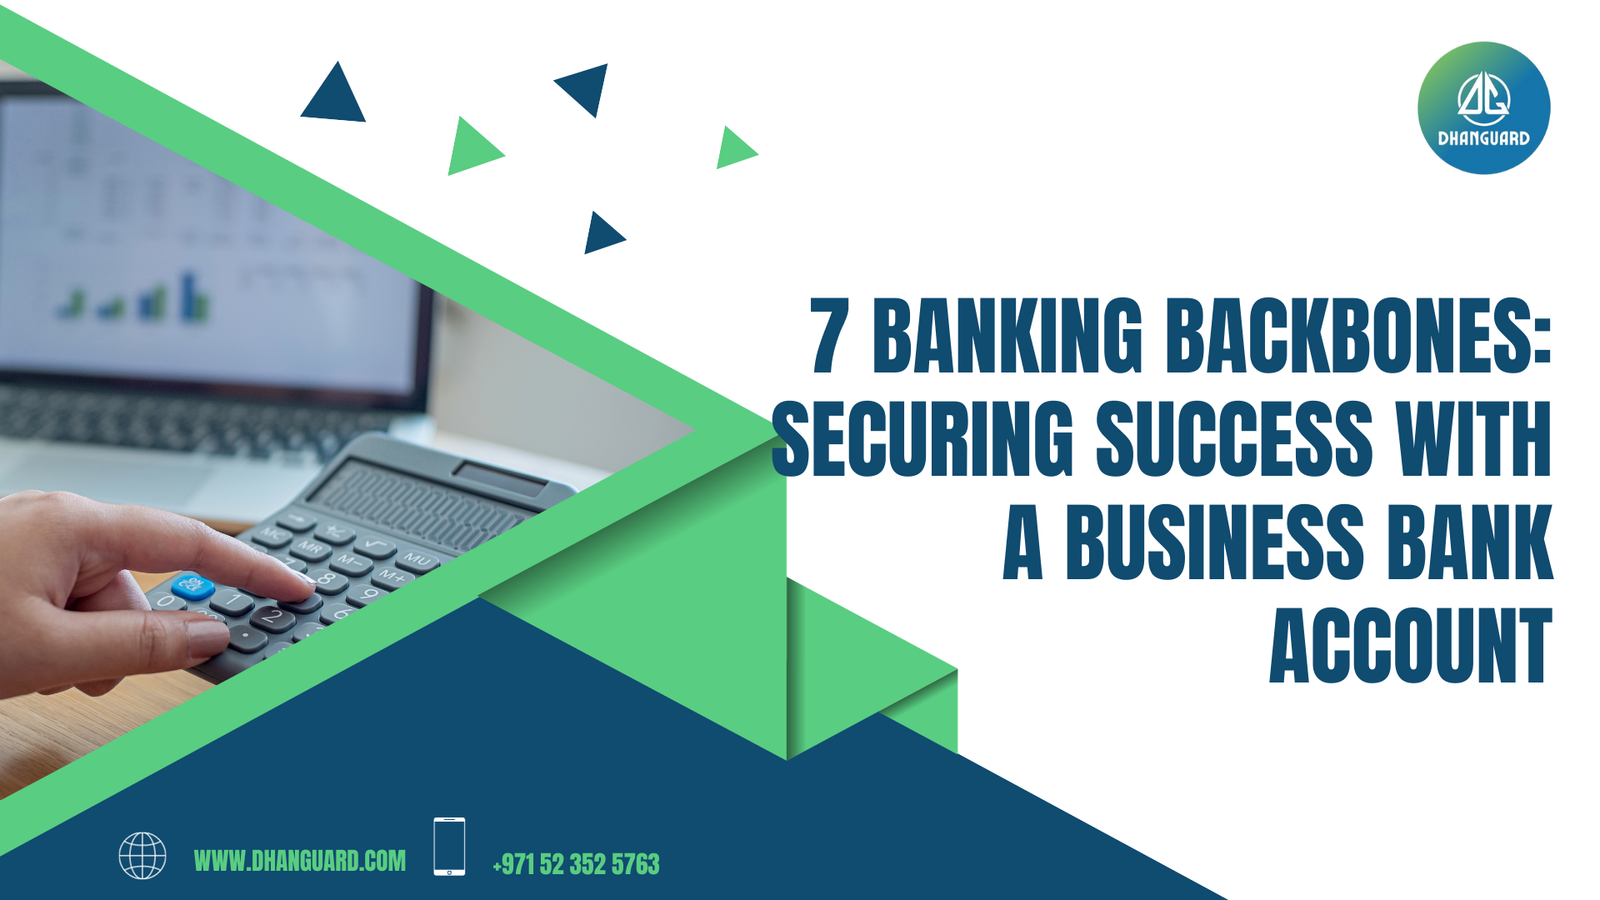 7 reasons why you need a business bank account | Dhanguard